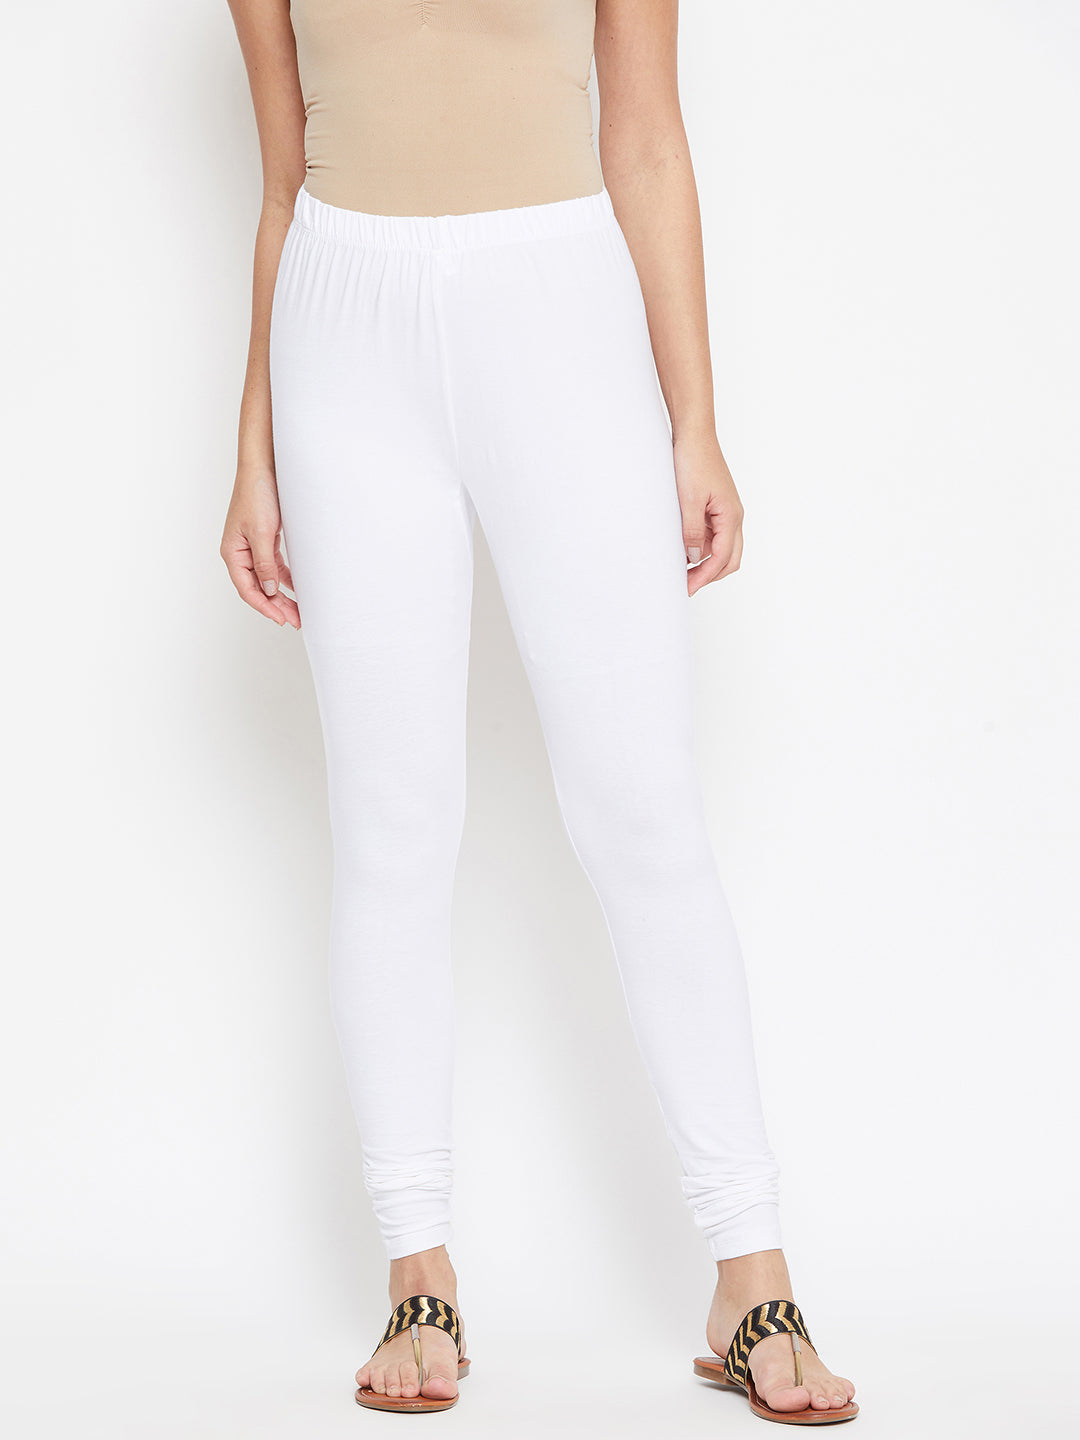 Buy De Moza Womens Cotton Printed Ankle Length Leggings OffWhite at  Amazon.in